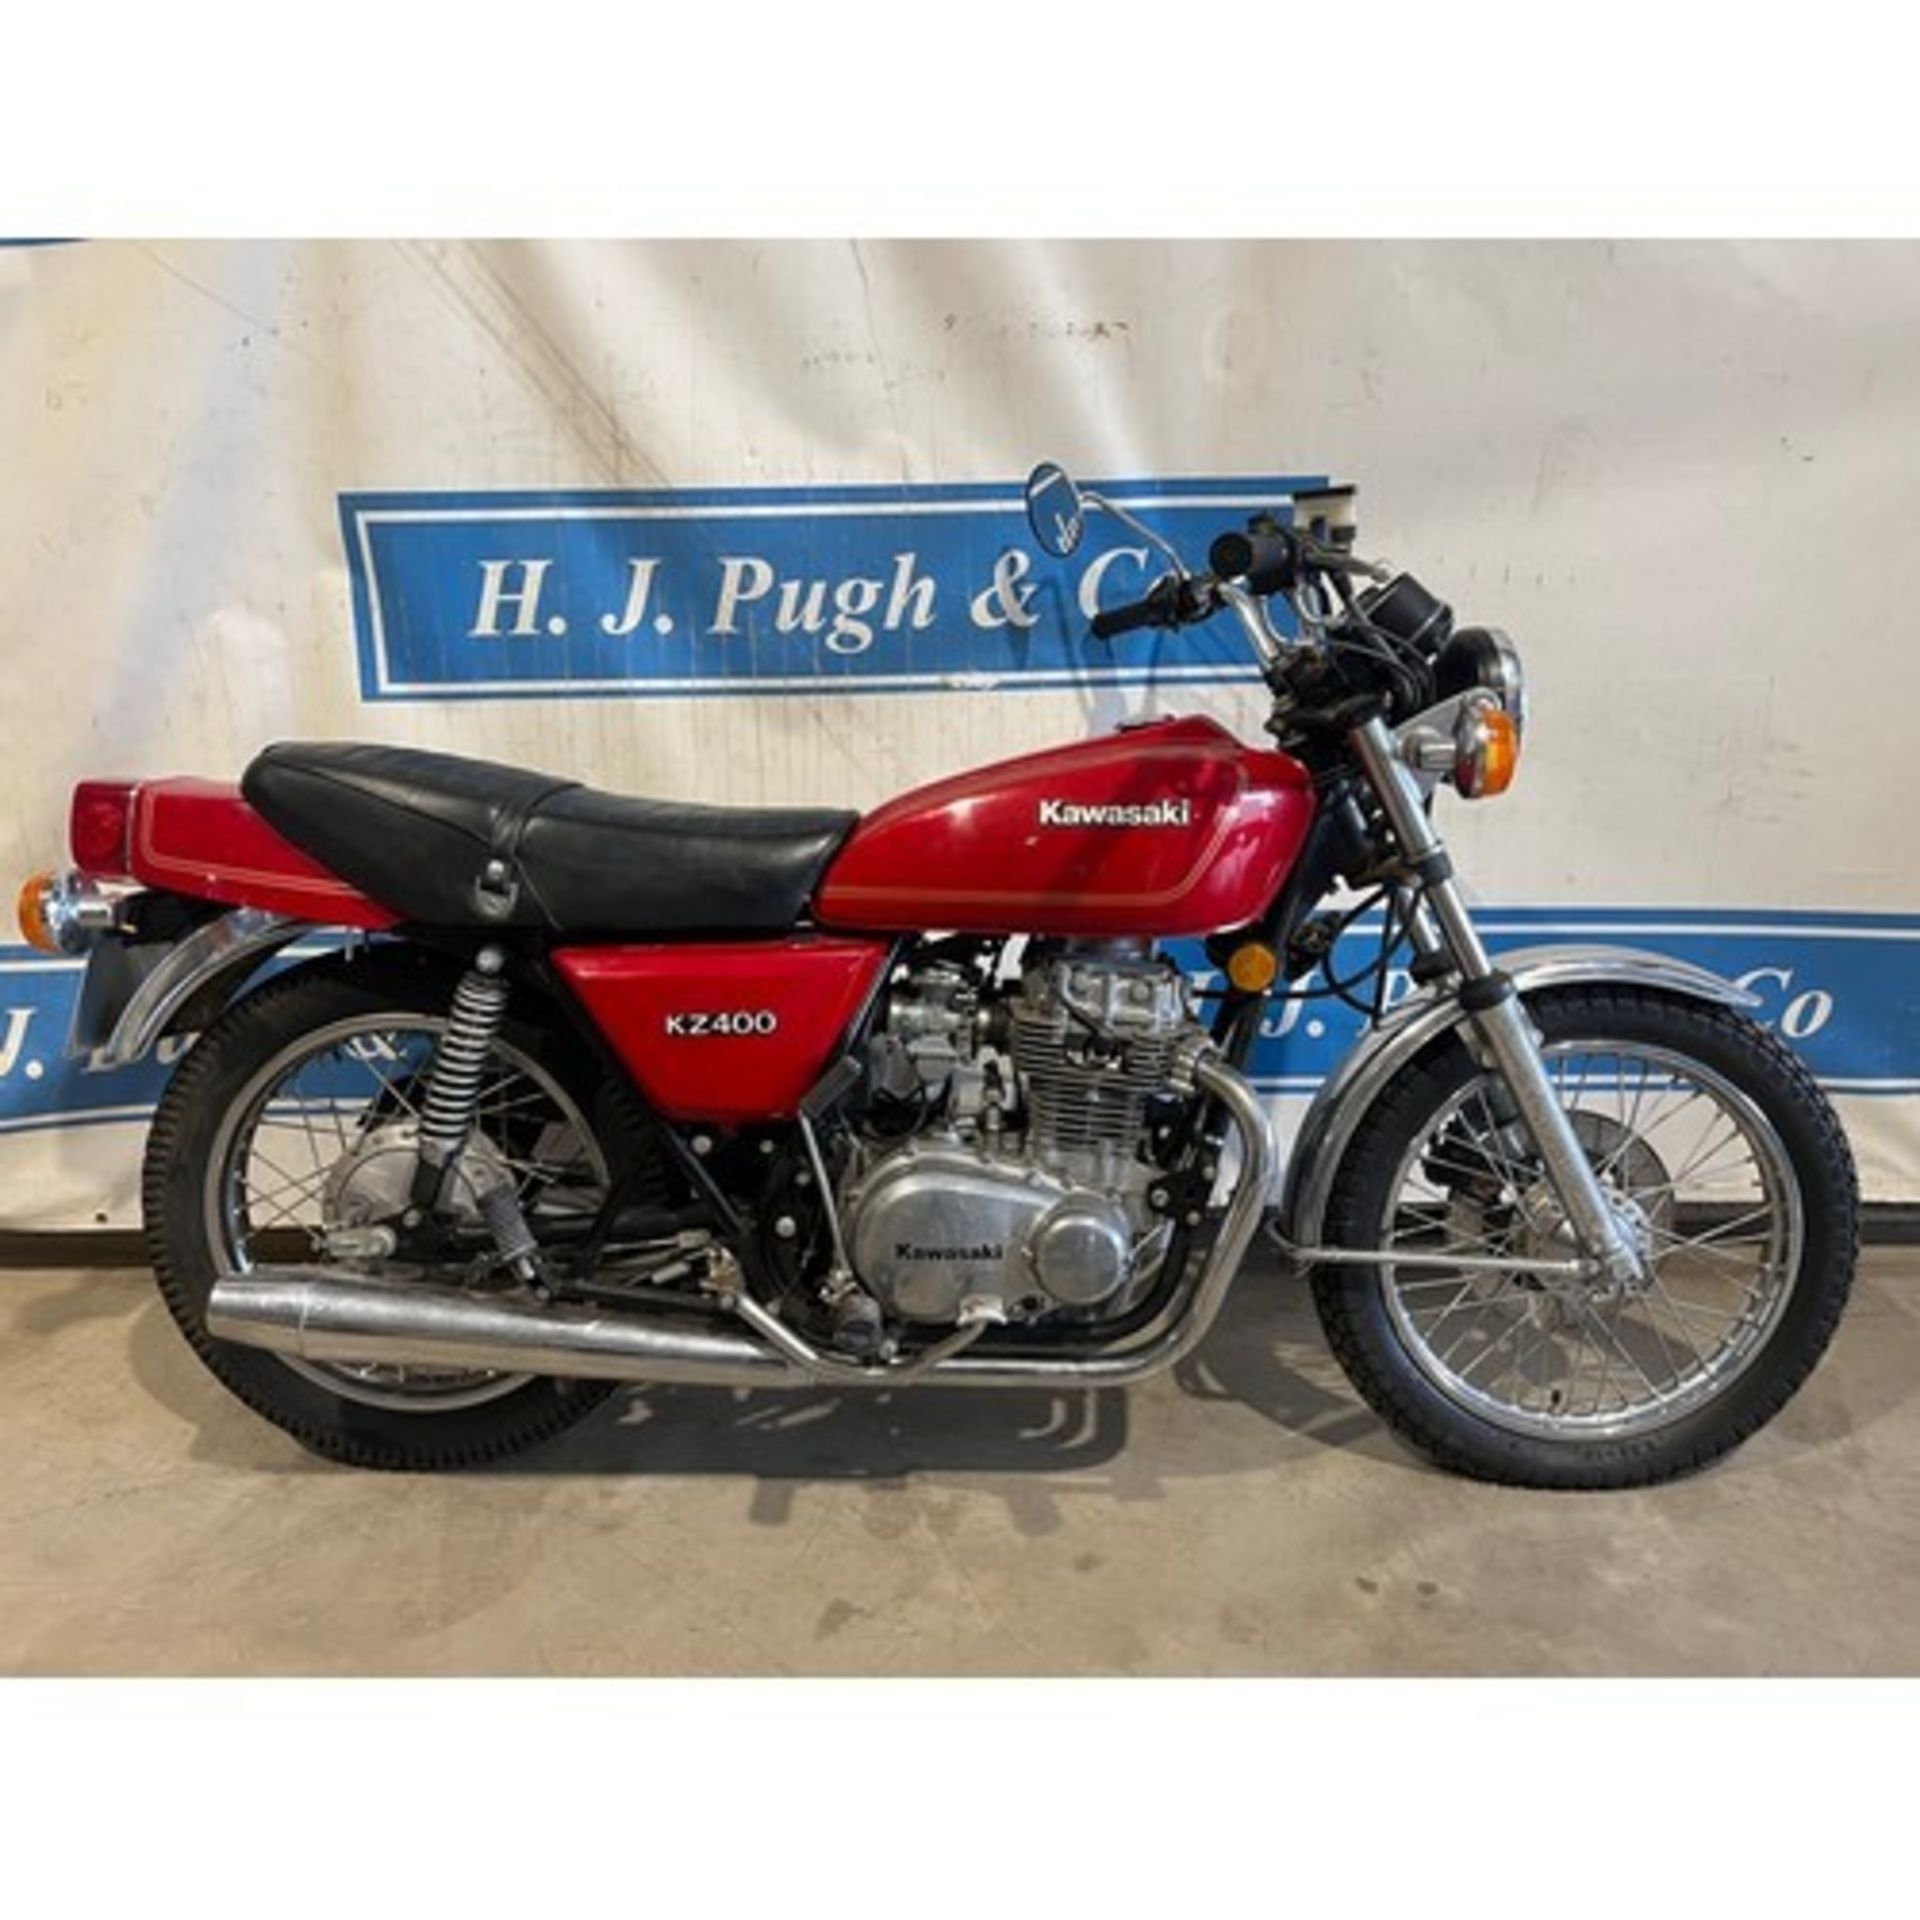 Kawasaki KZ400A motorcycle. 1979. 398cc Engine turns over with compression. Reg. ATH 504T. V5